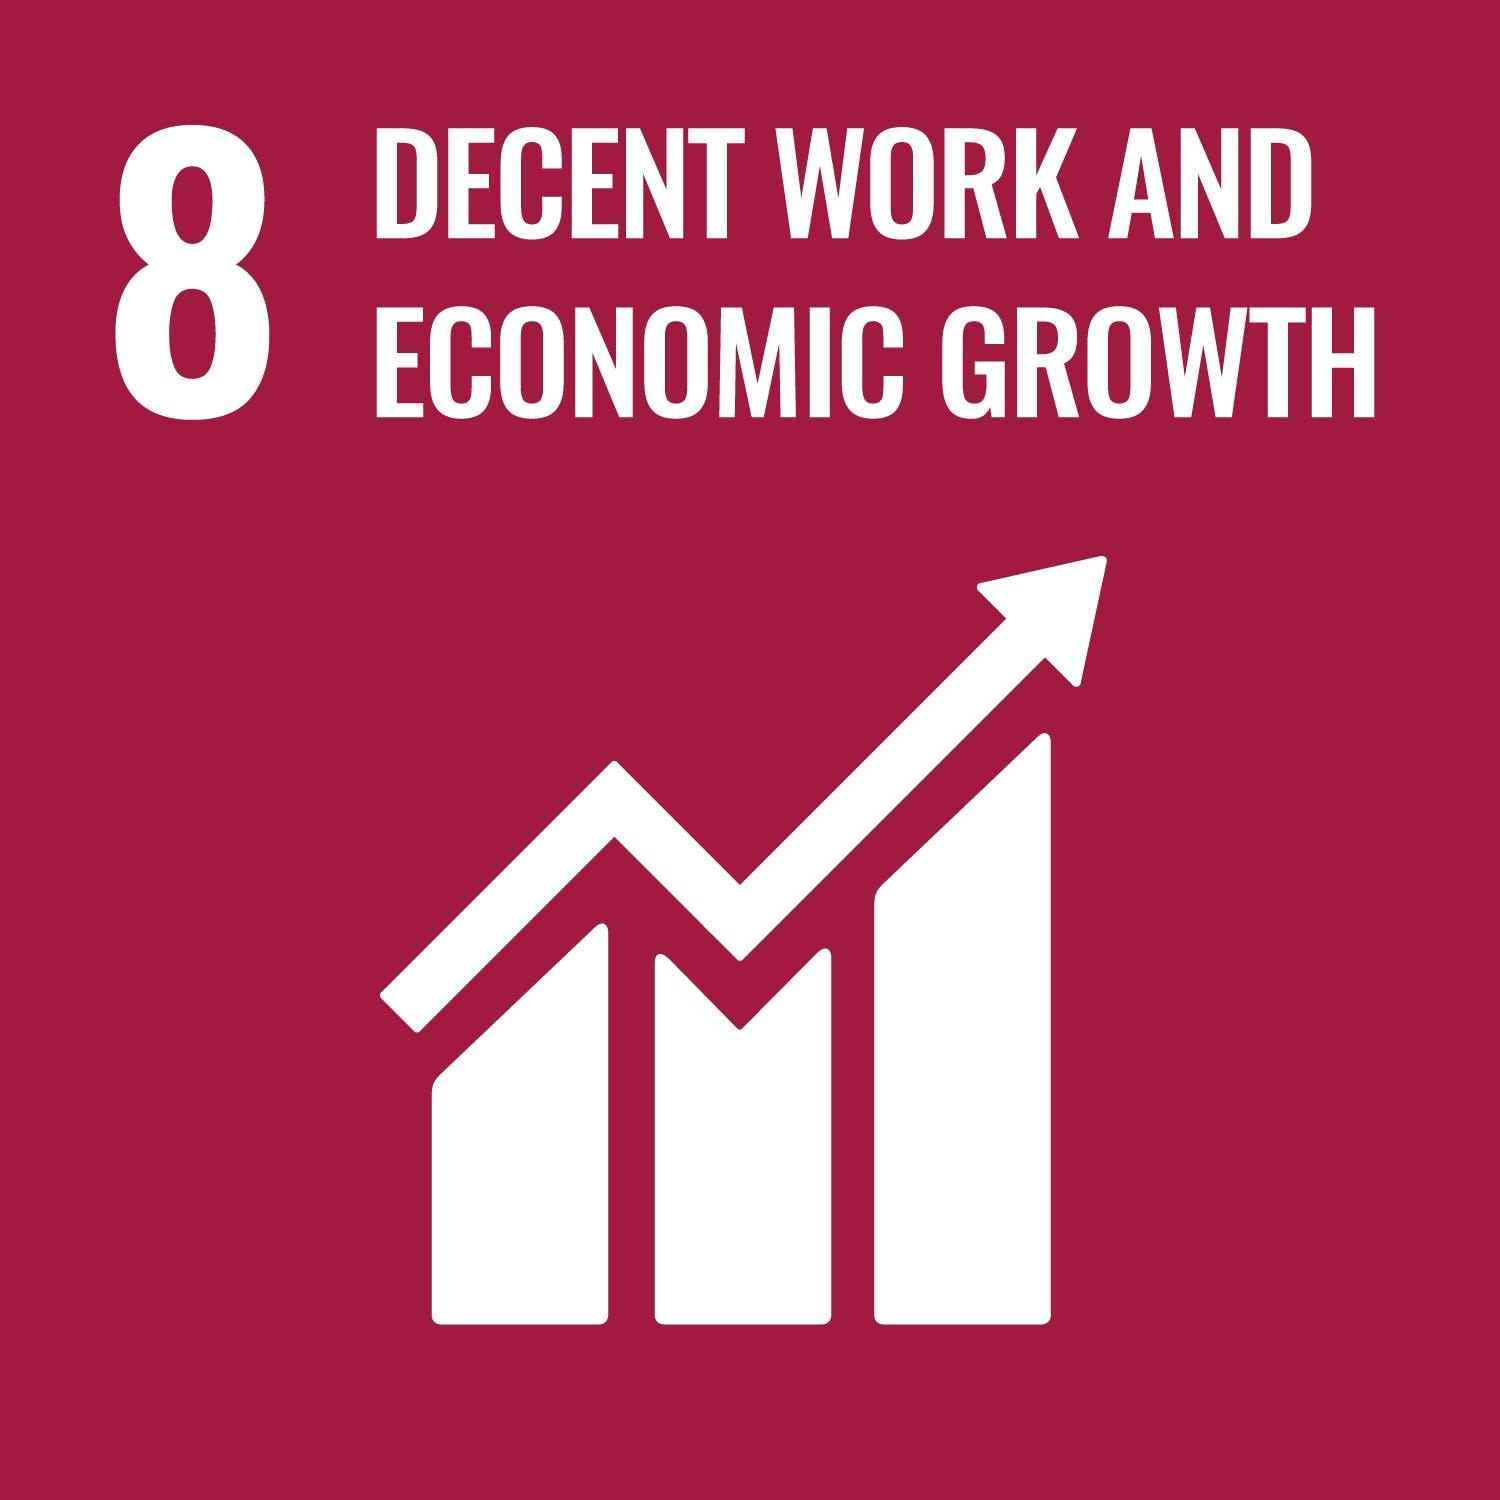 Economic growth for the community and protection of labour rights